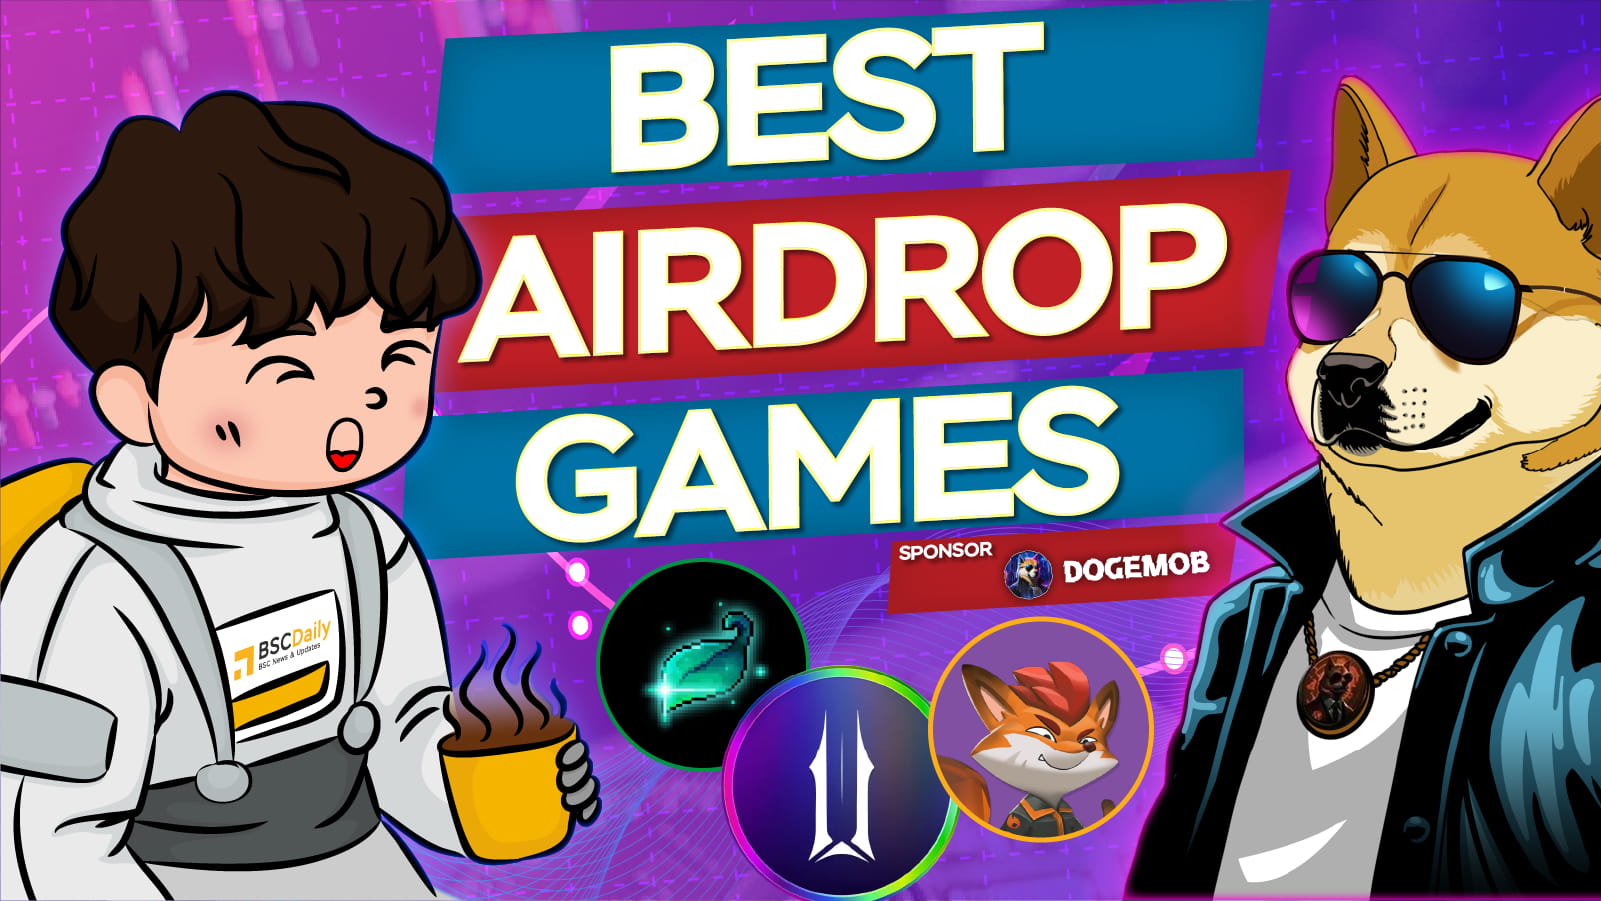 BEST AIRDROP GAMES! PLAY TO AIRDROP